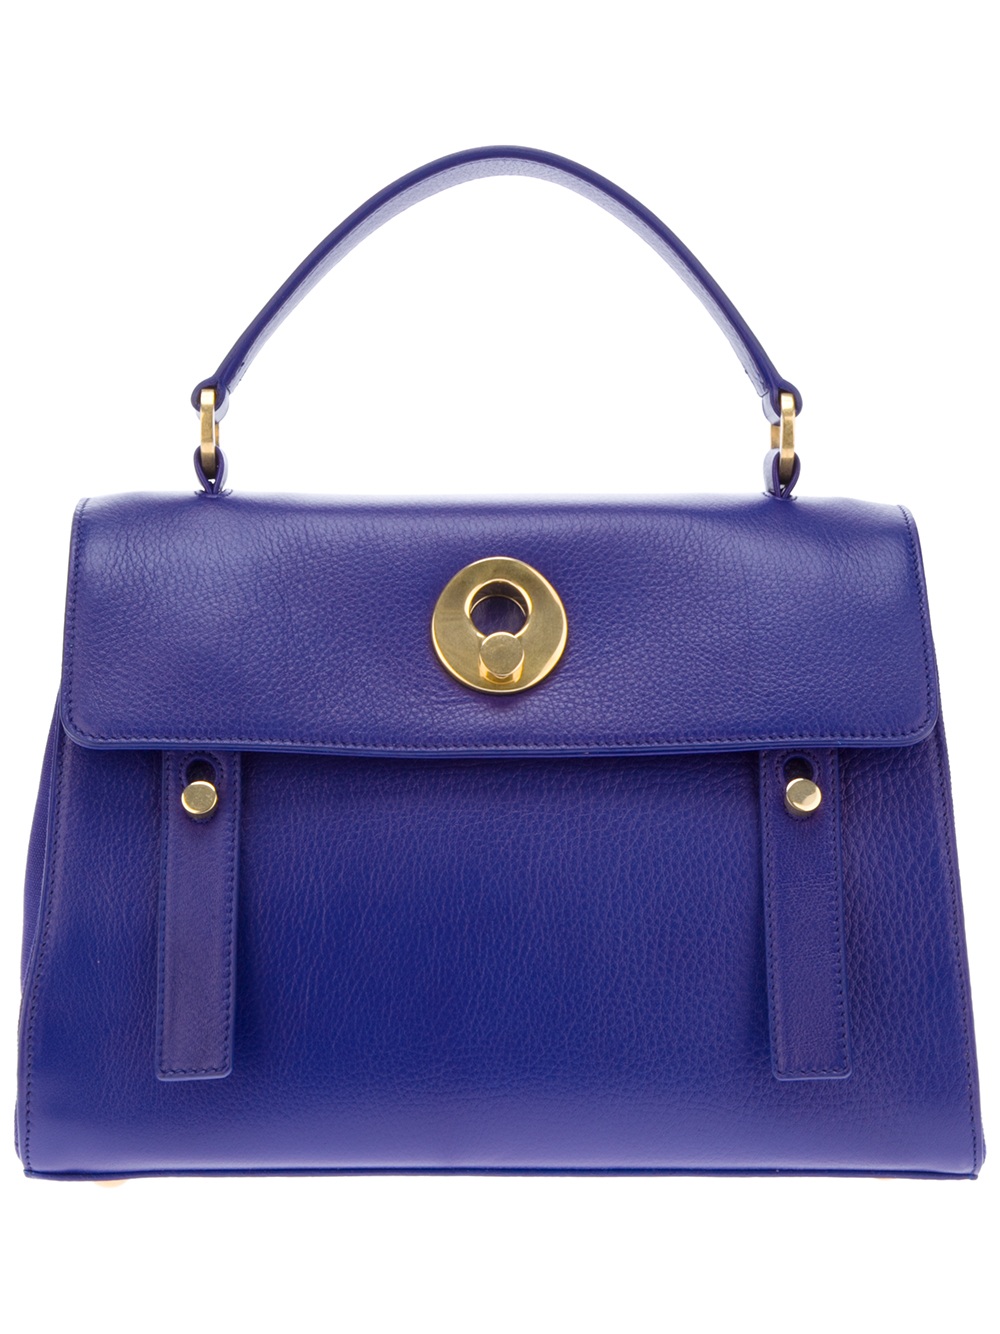 Saint Laurent Muse Two Small Satchel in Blue | Lyst